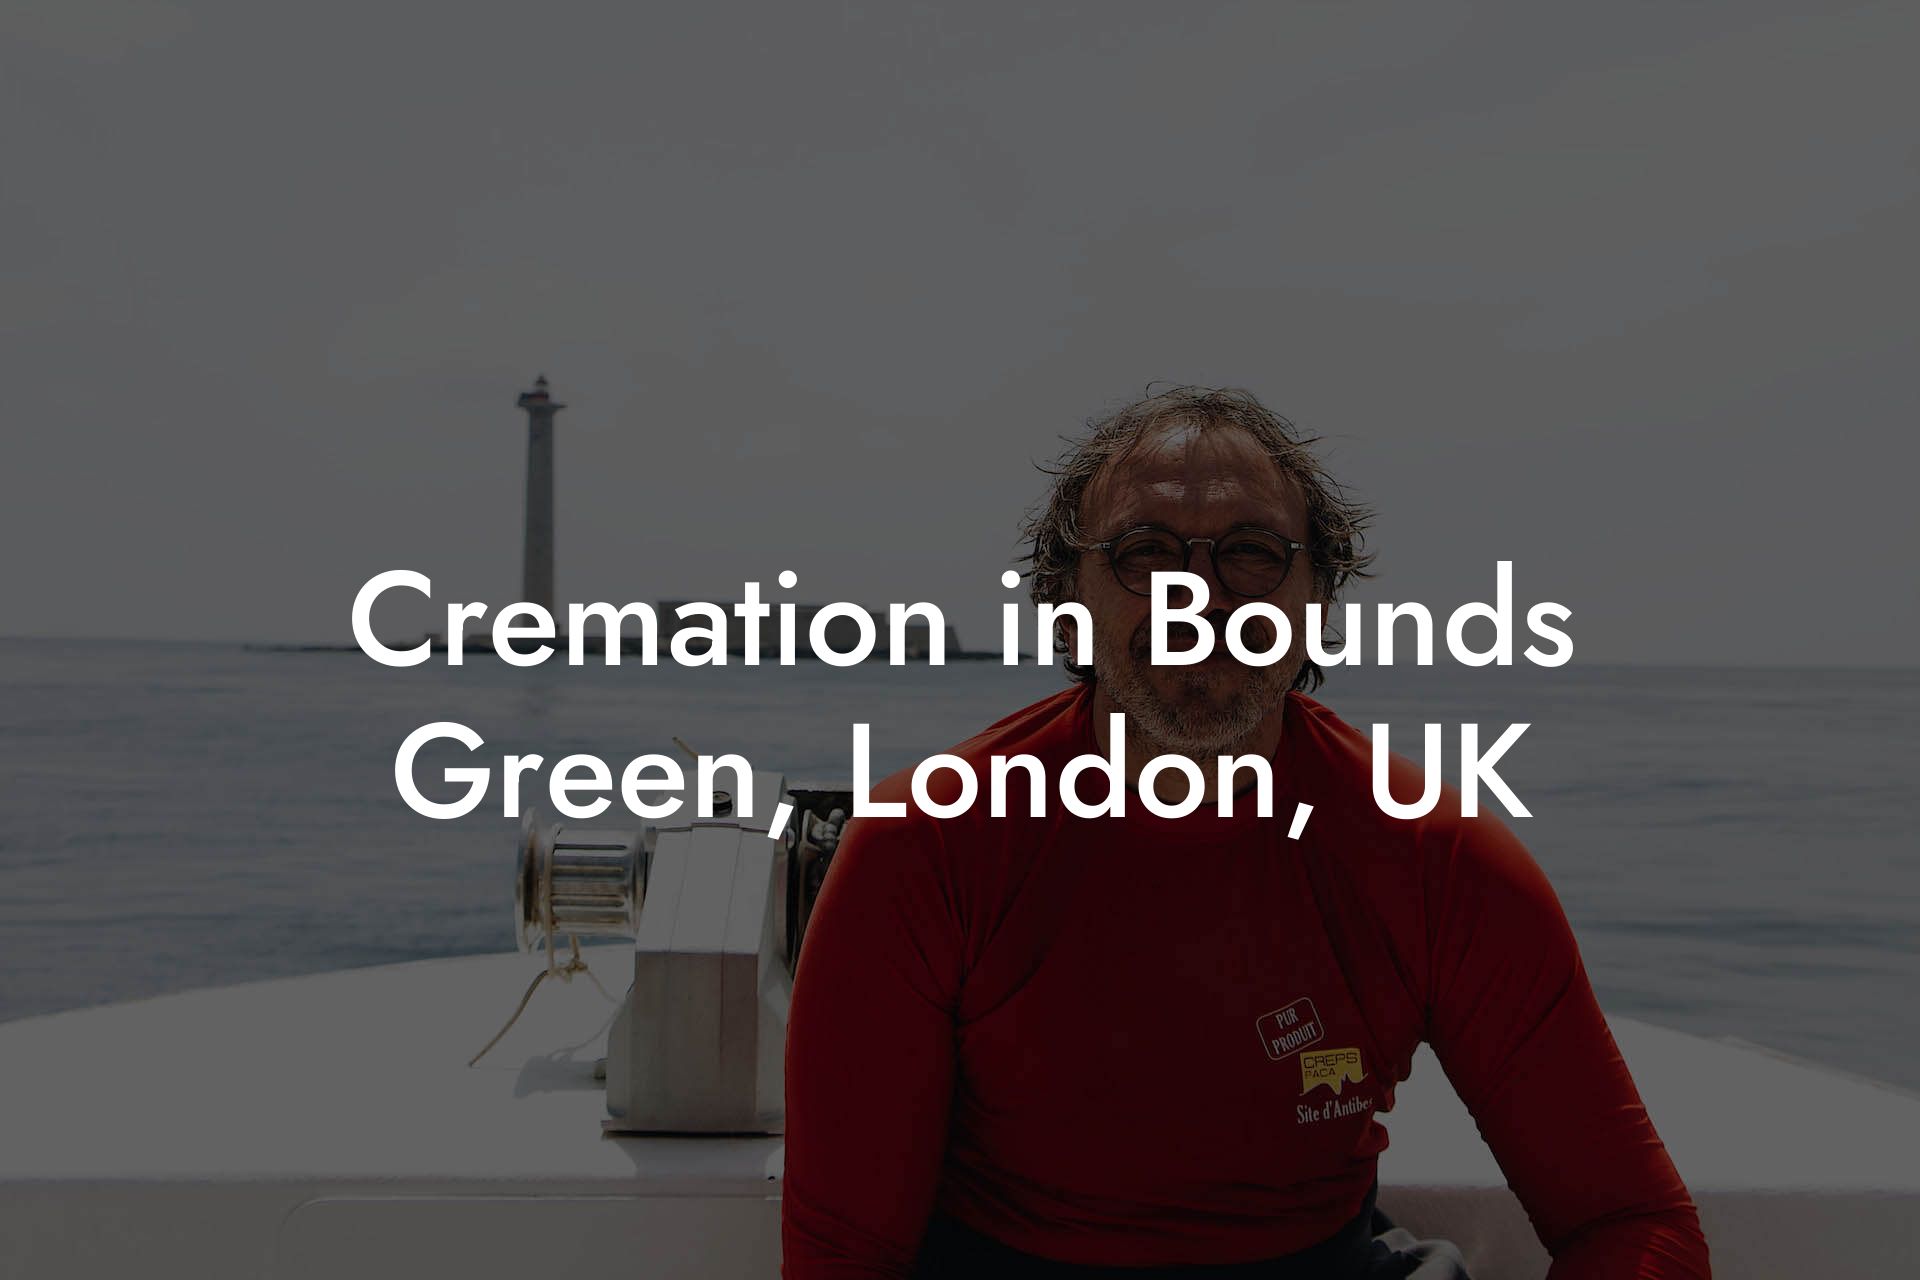 Cremation in Bounds Green, London, UK